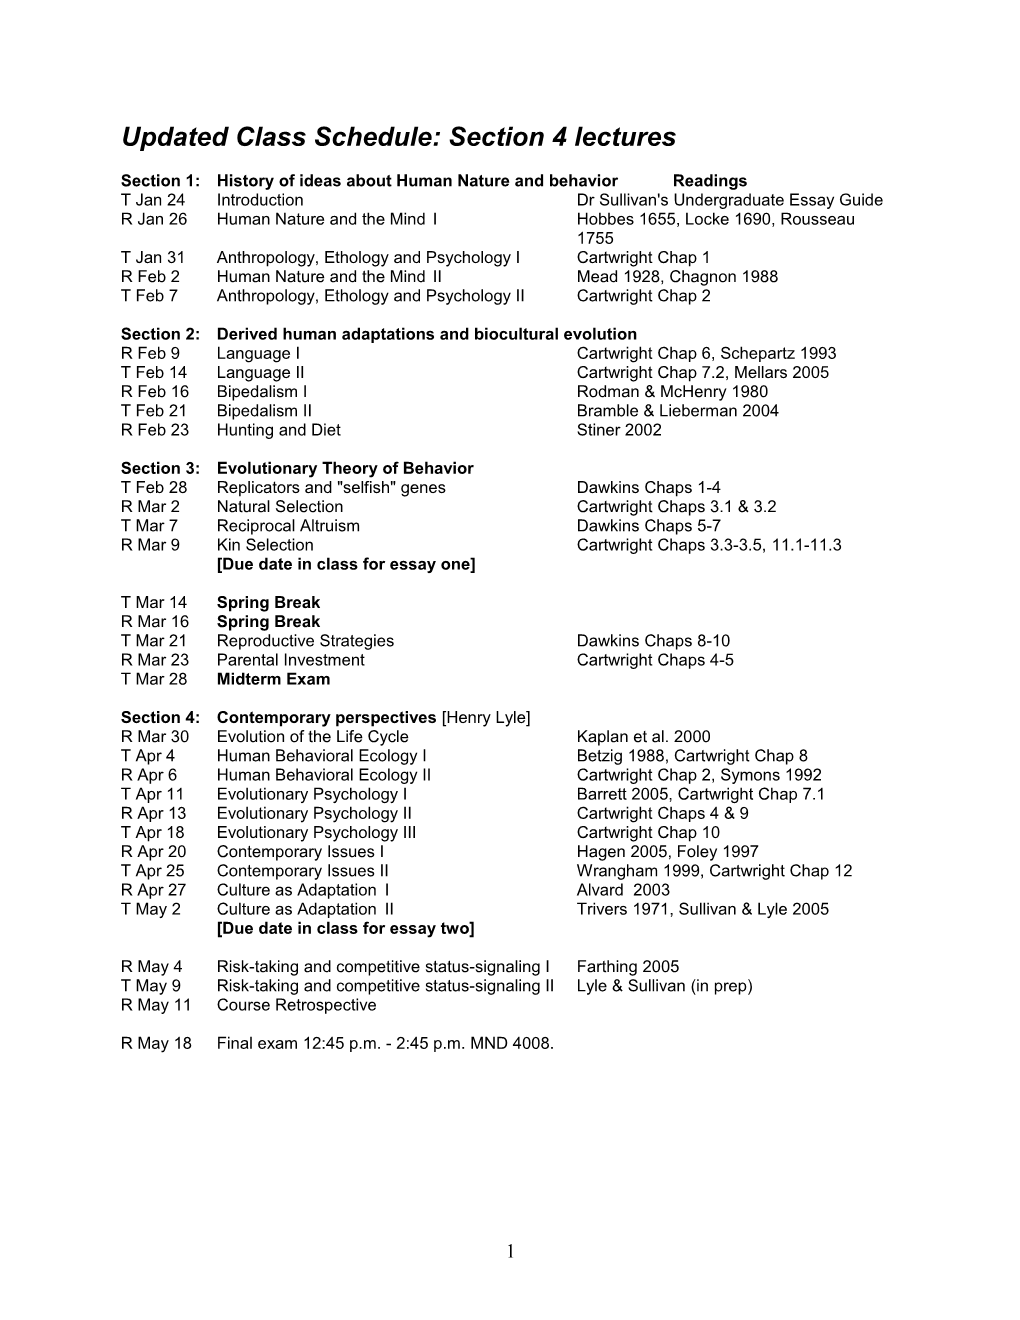 Updated Class Schedule: Section 4 Lectures